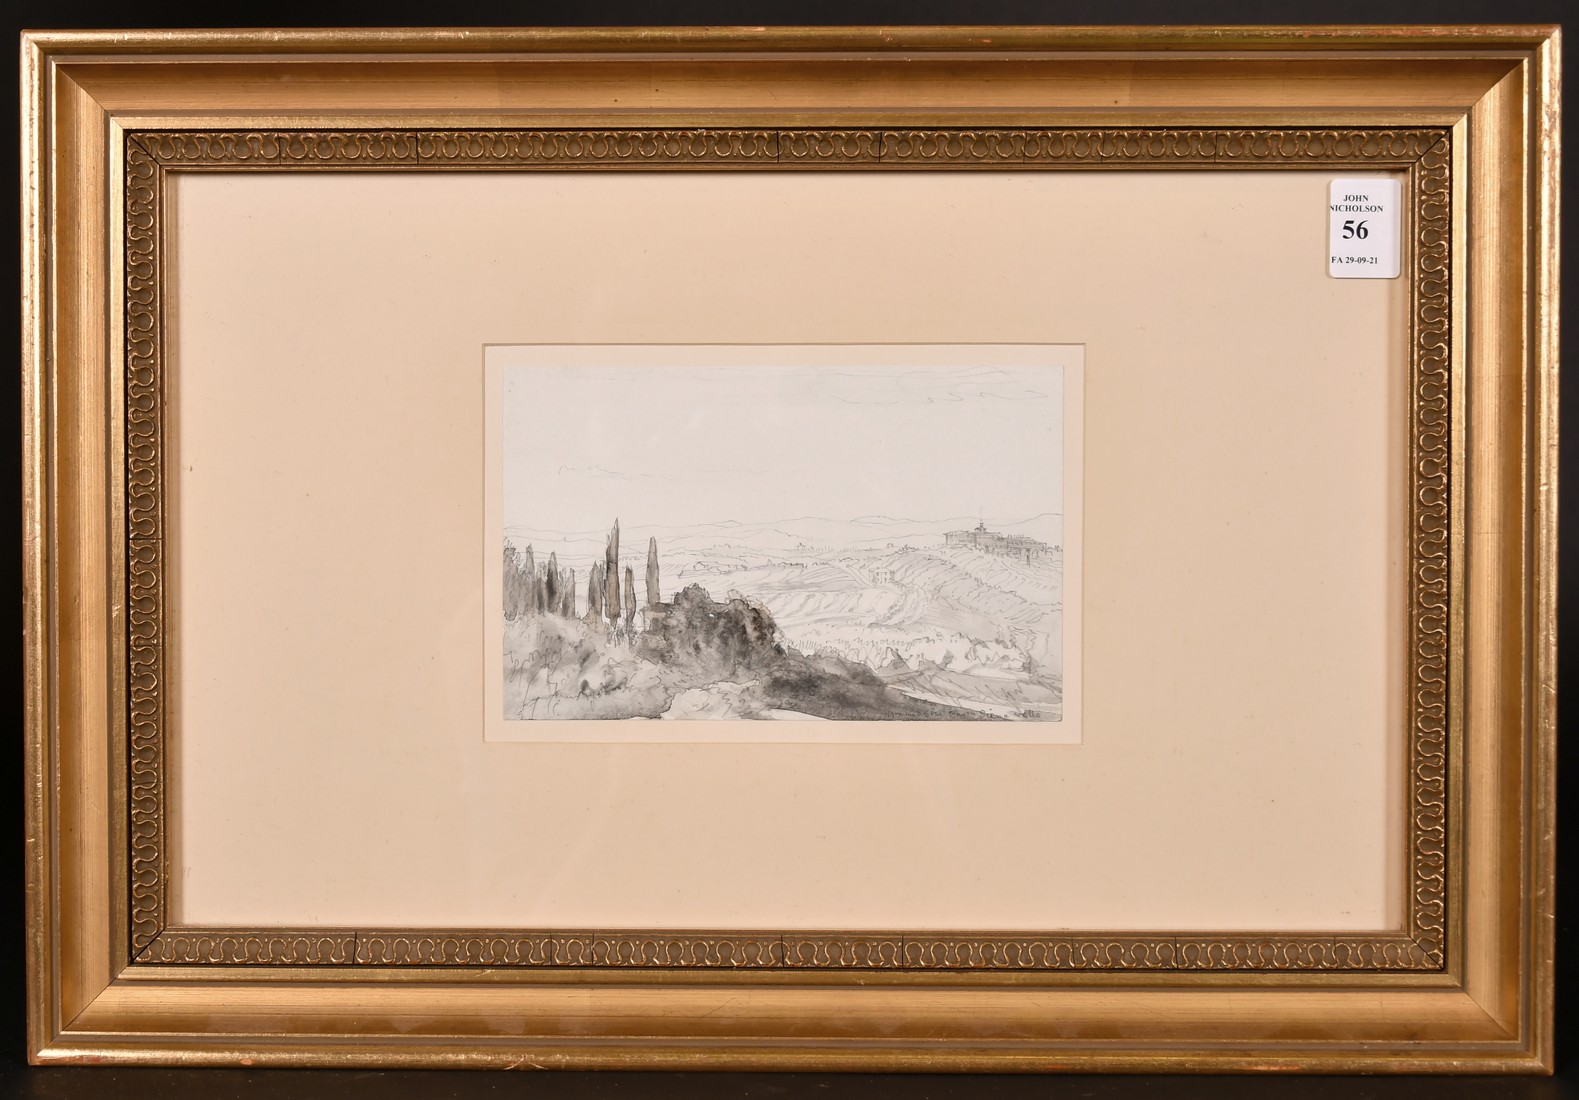 Muirhead Bone, 'From Sienna Walls', pencil and wash, inscribed, 4.5" x 7", Provenance: T & R Annan & - Image 2 of 4